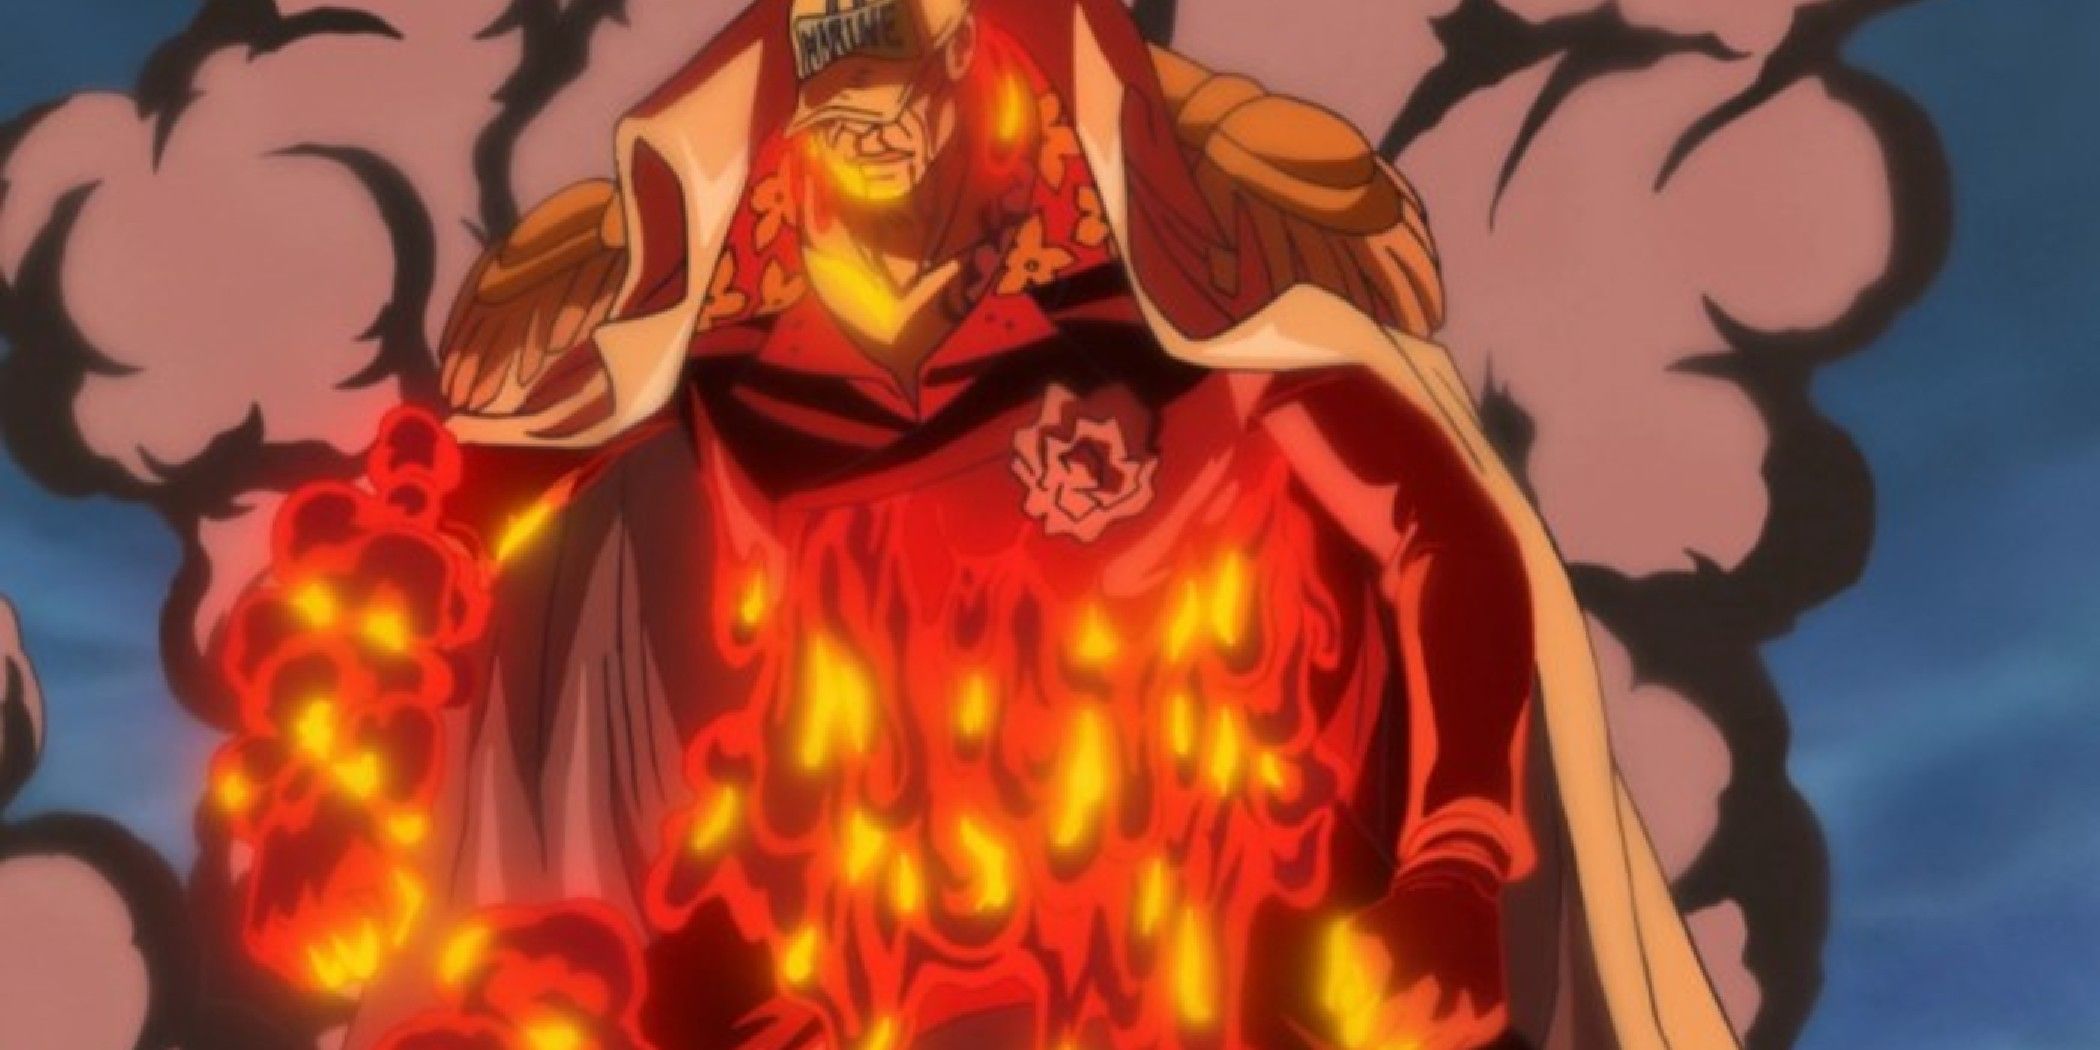 Akainu in his magma form with abdomen turning to magma